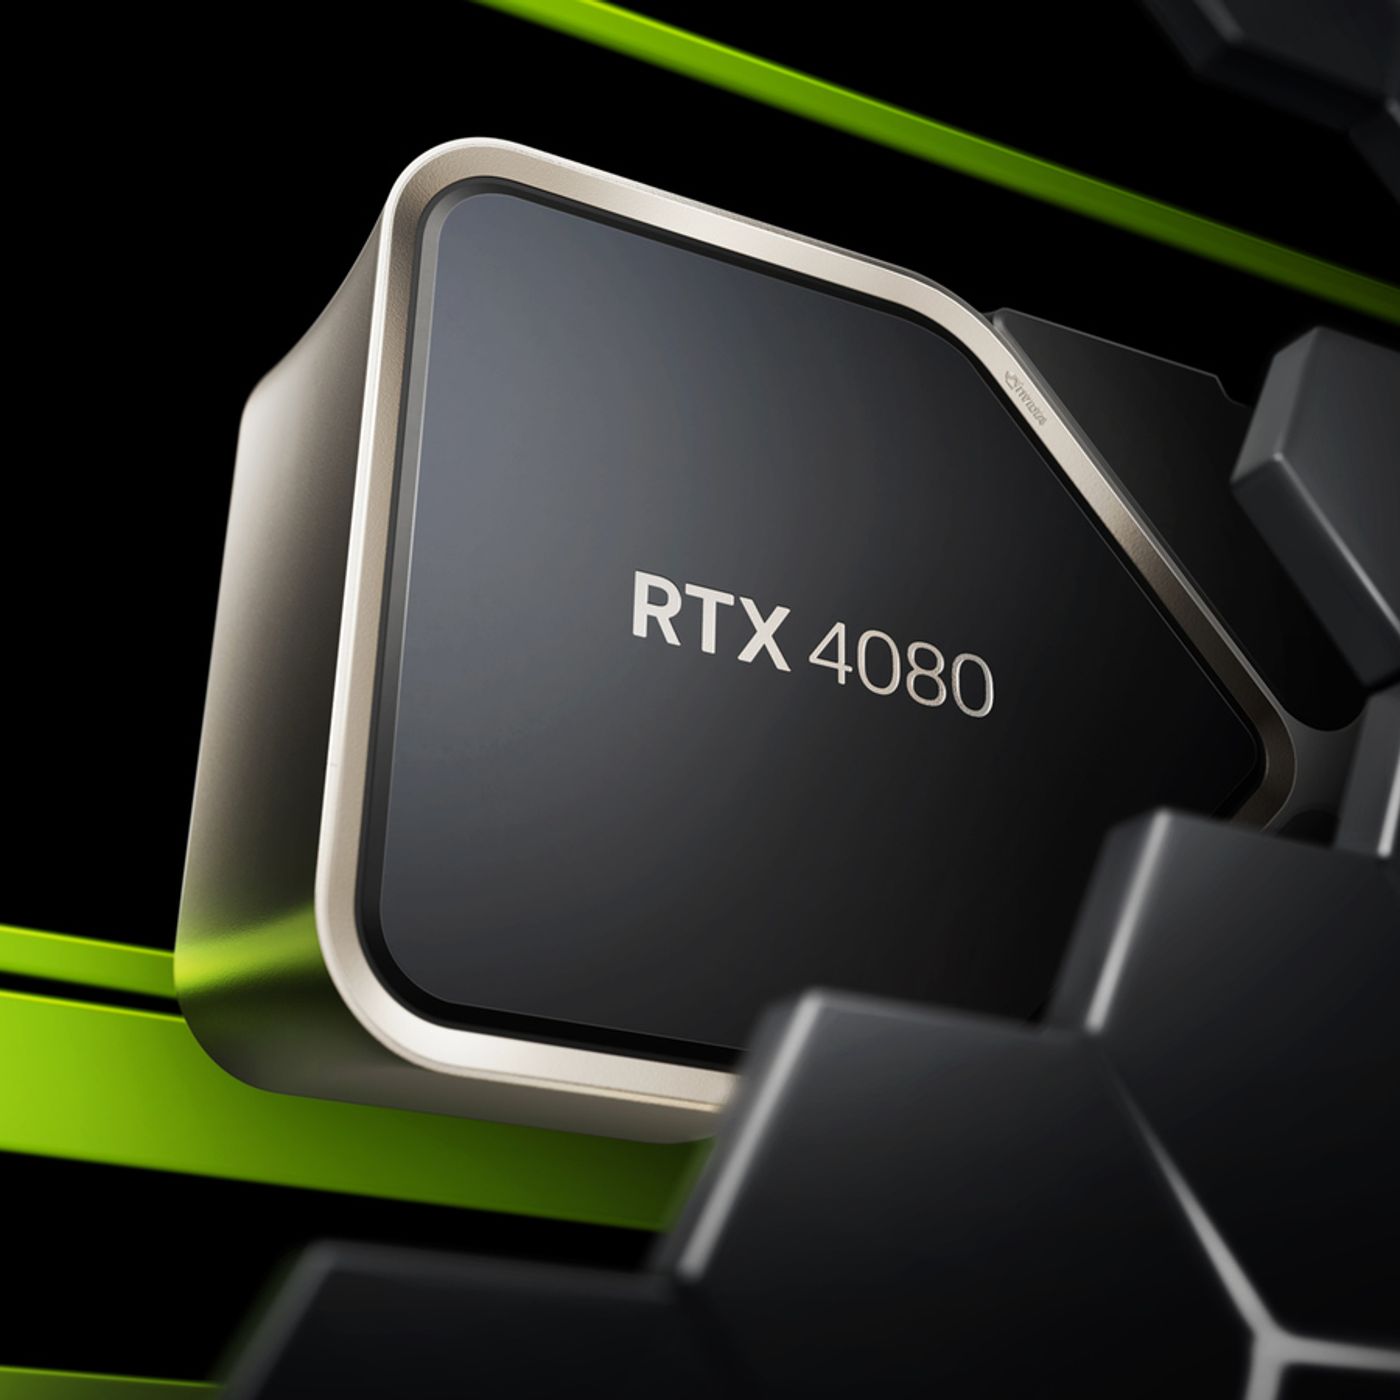 S18 Ep1240: Nvidia GeForce NOW RTX 4080 Hands-On Impressions and The Spawnies Interview